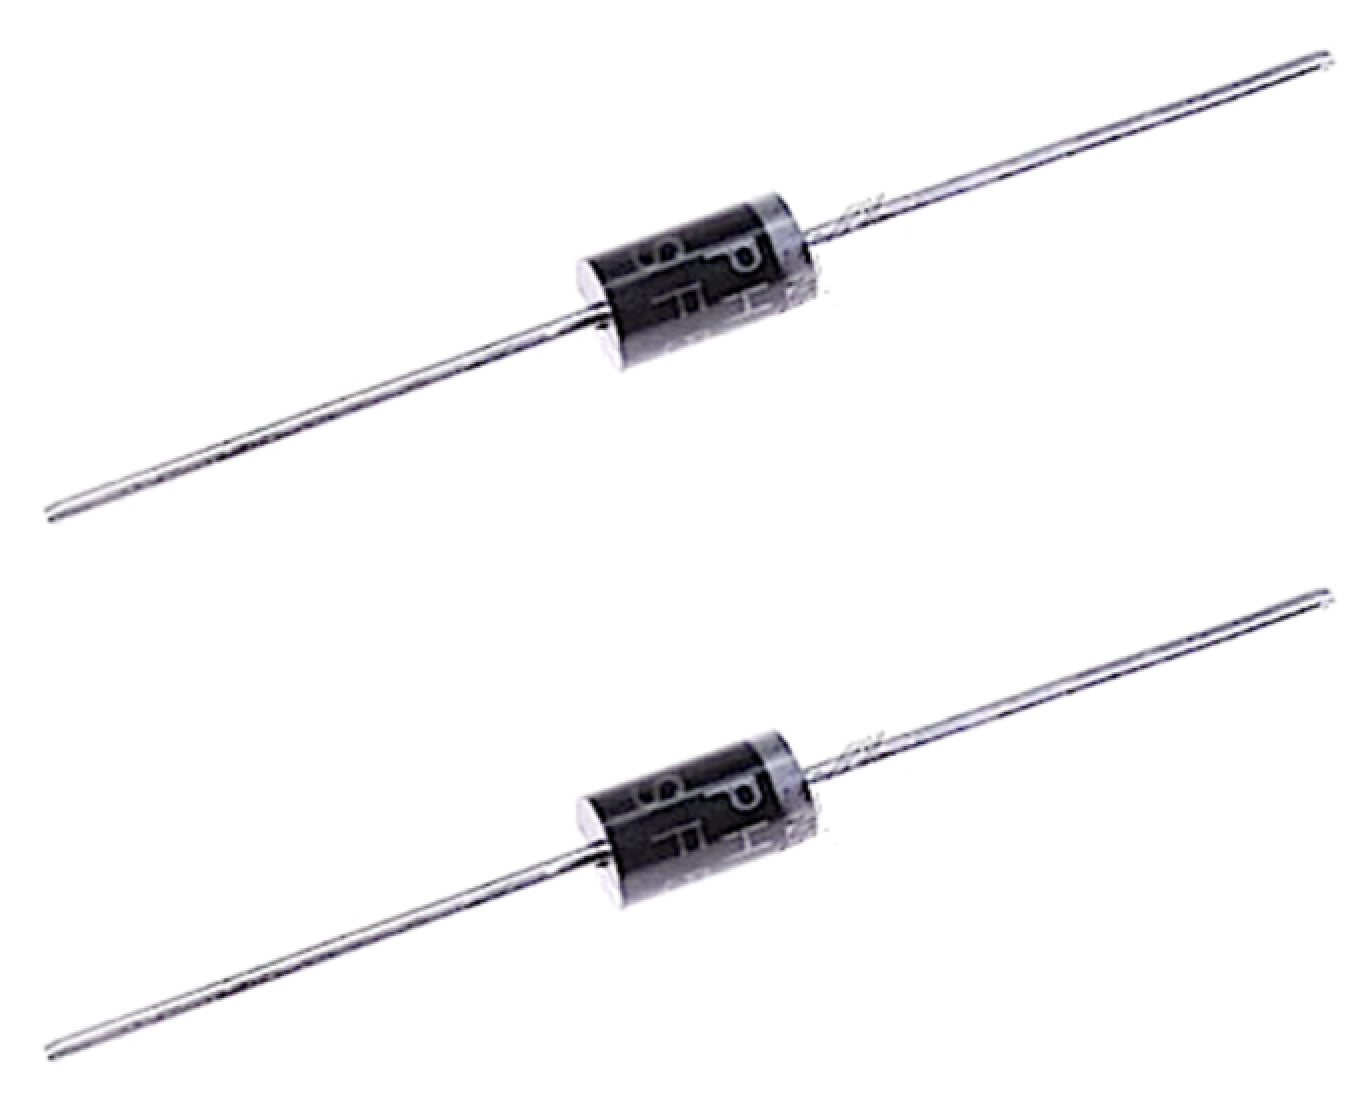 MUR460 Diode Fast Recovery Semiconductor (DO-201AD) - Spared Parts UK